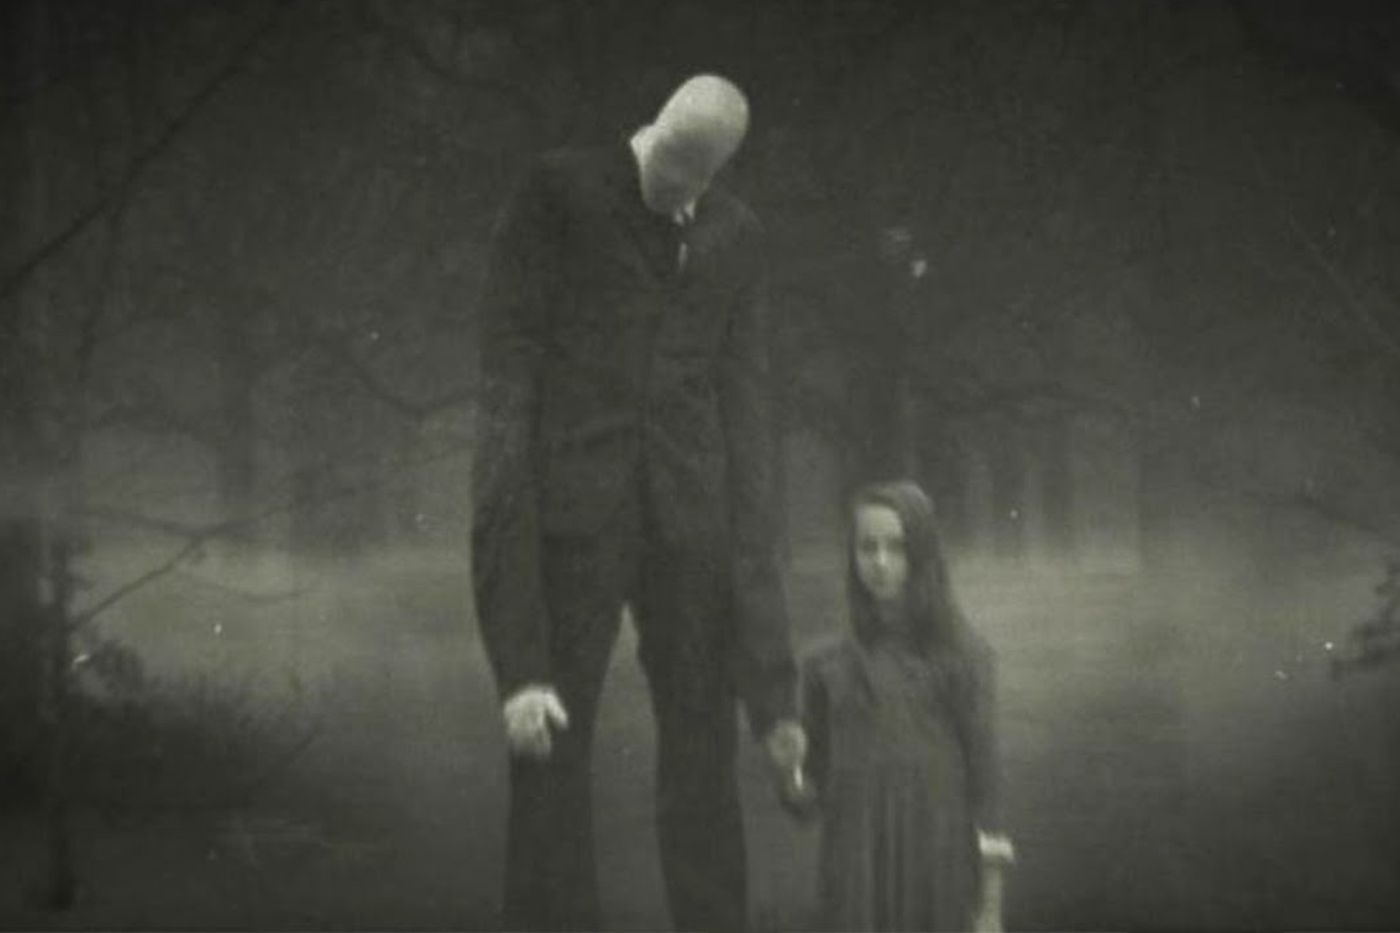 A typical depiction of the Slender Man